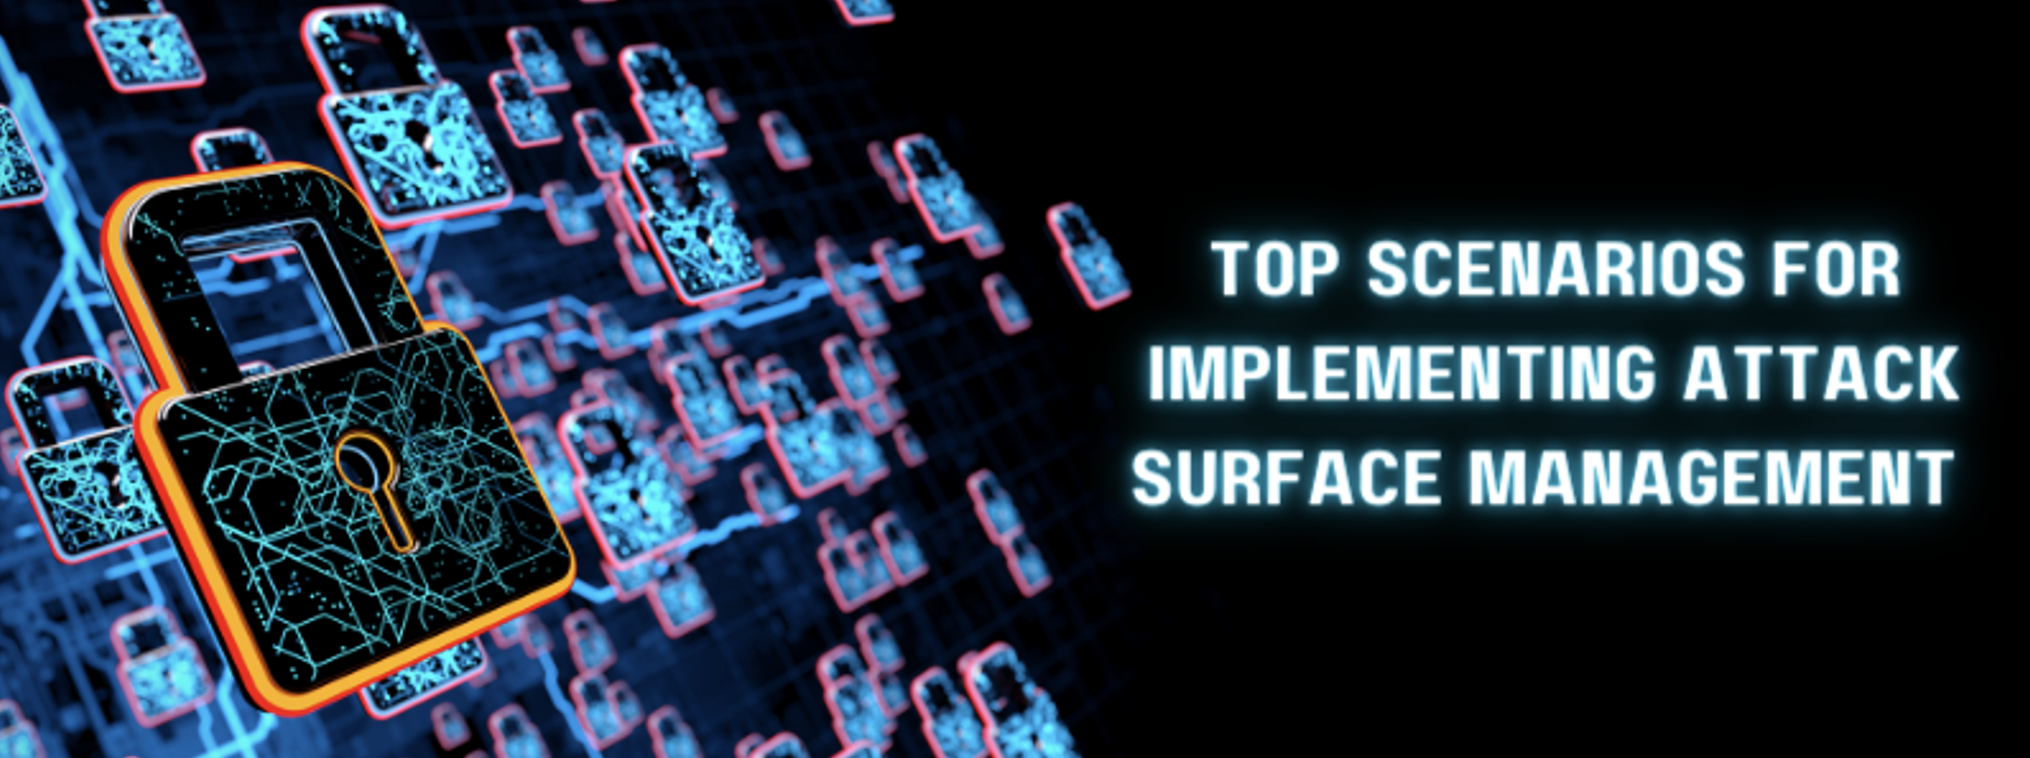 Top Scenarios for Implementing Attack Surface Management